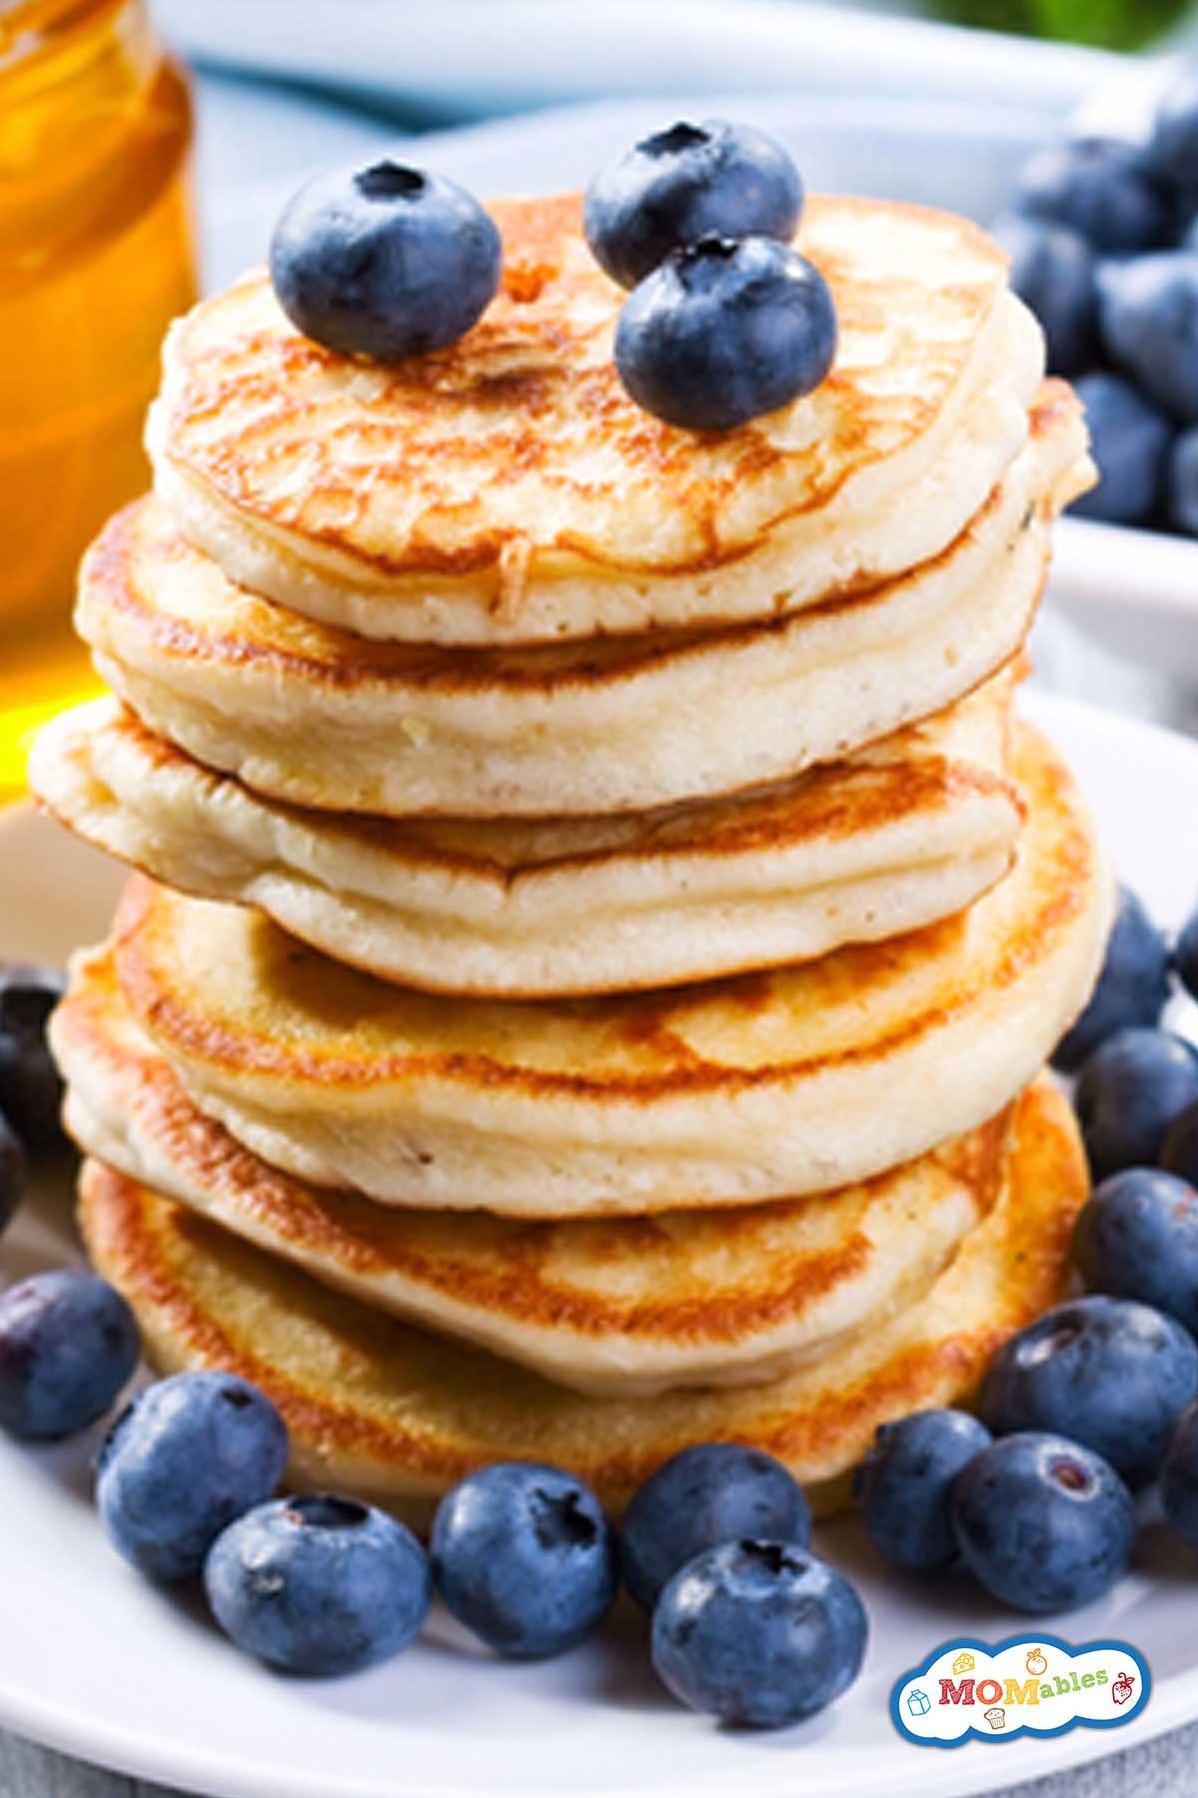  You can easily customize these pancakes by adding your favorite fruits or nuts!